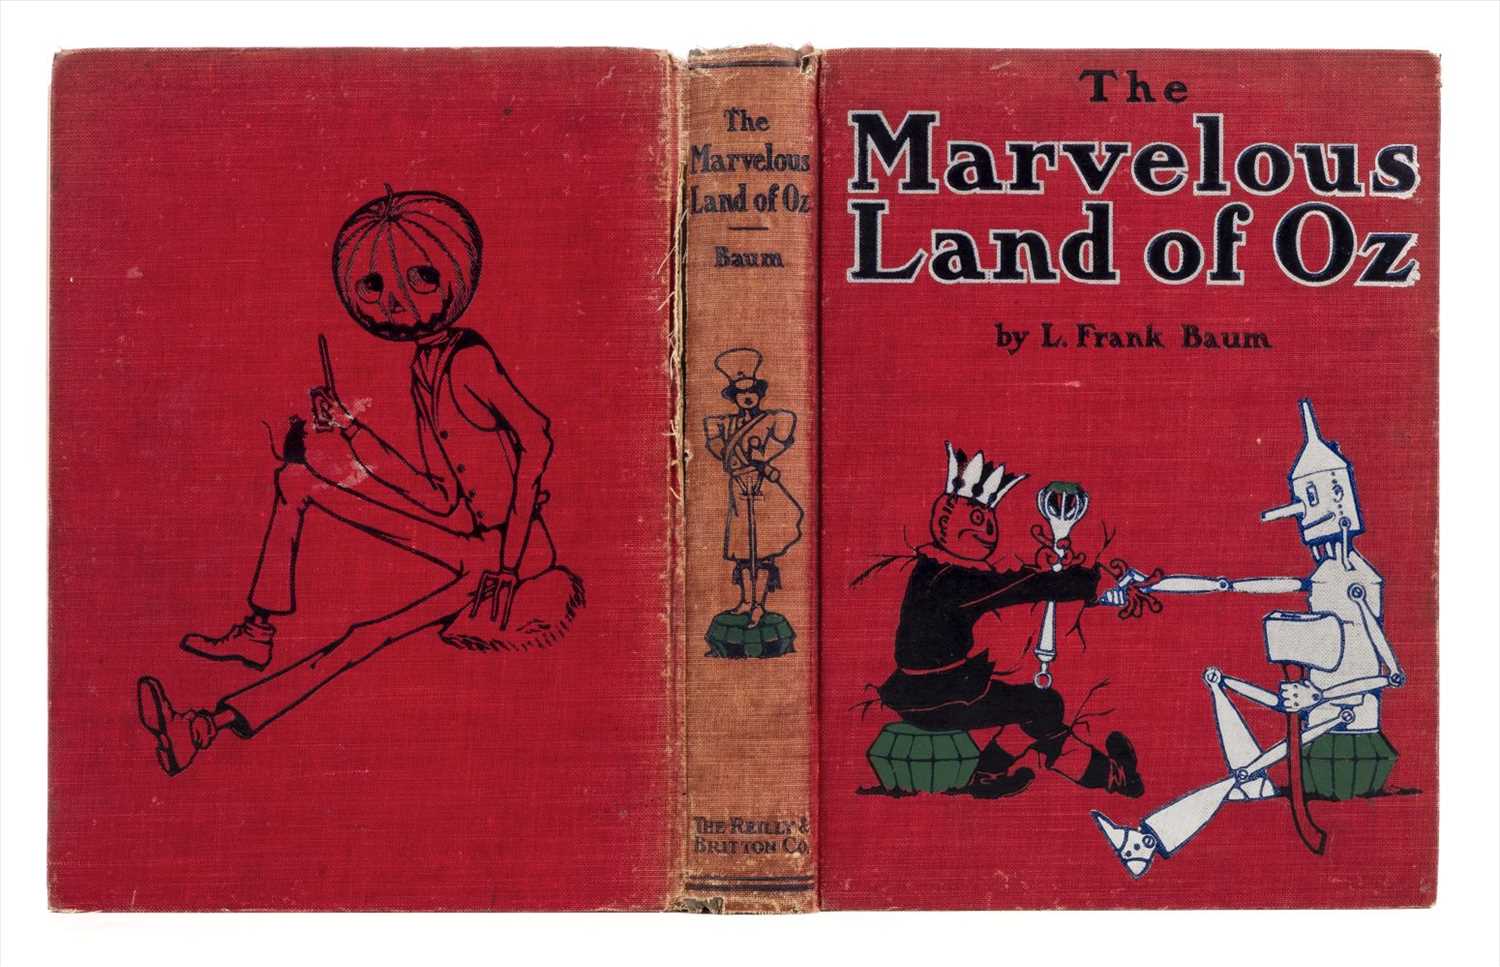 Lot 597 - Baum (L. Frank). The Marvelous Land of Oz, 1st edition, 1st state, Chicago., 1904